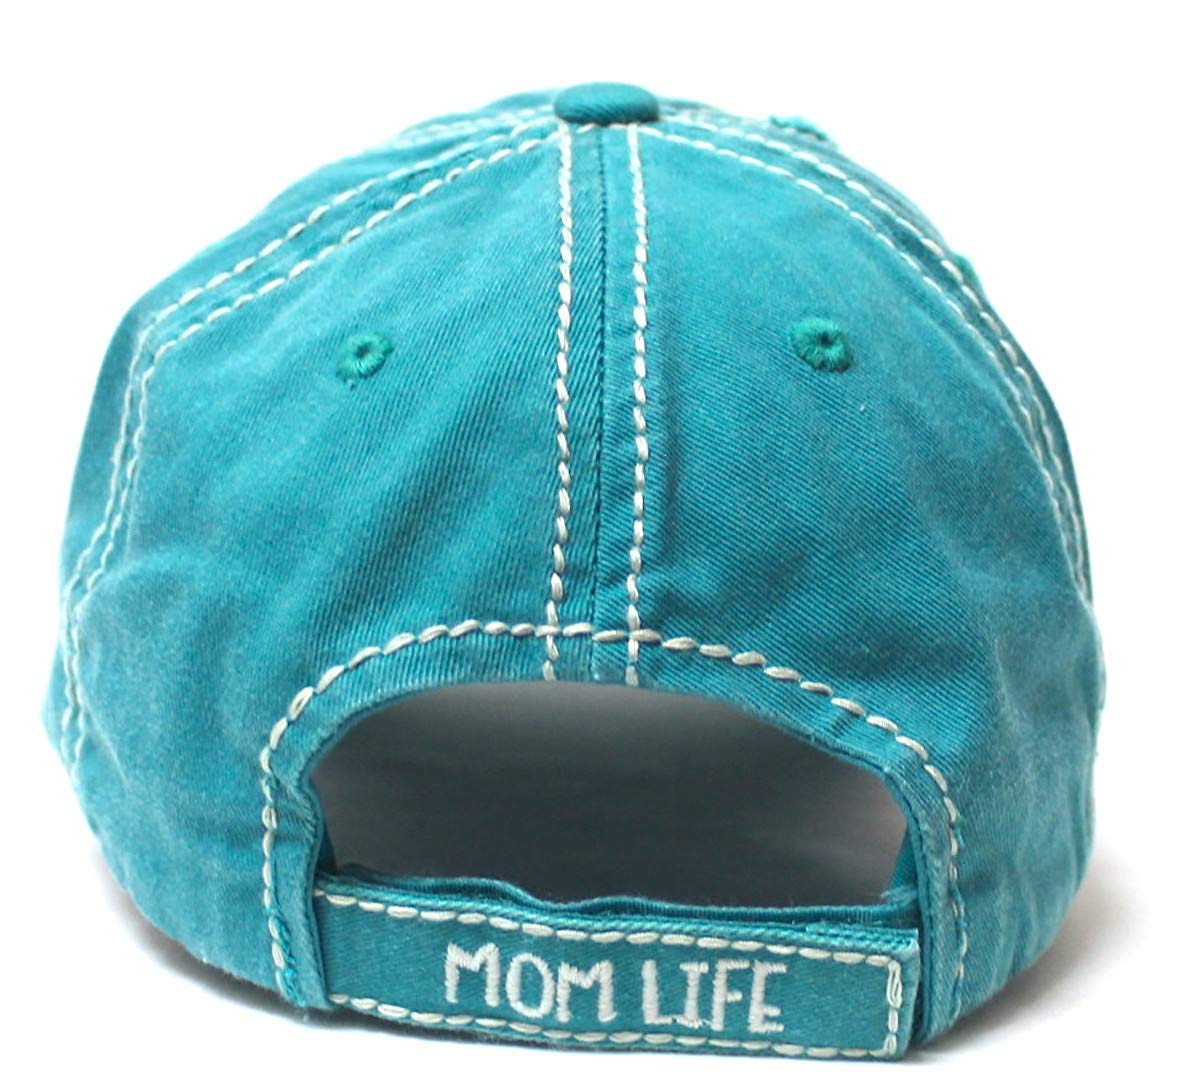 Women's Ballcap Mommin' is My Cardio Distressed Vintage Unconstructed Embroidered Hat, Turquoise - Caps 'N Vintage 